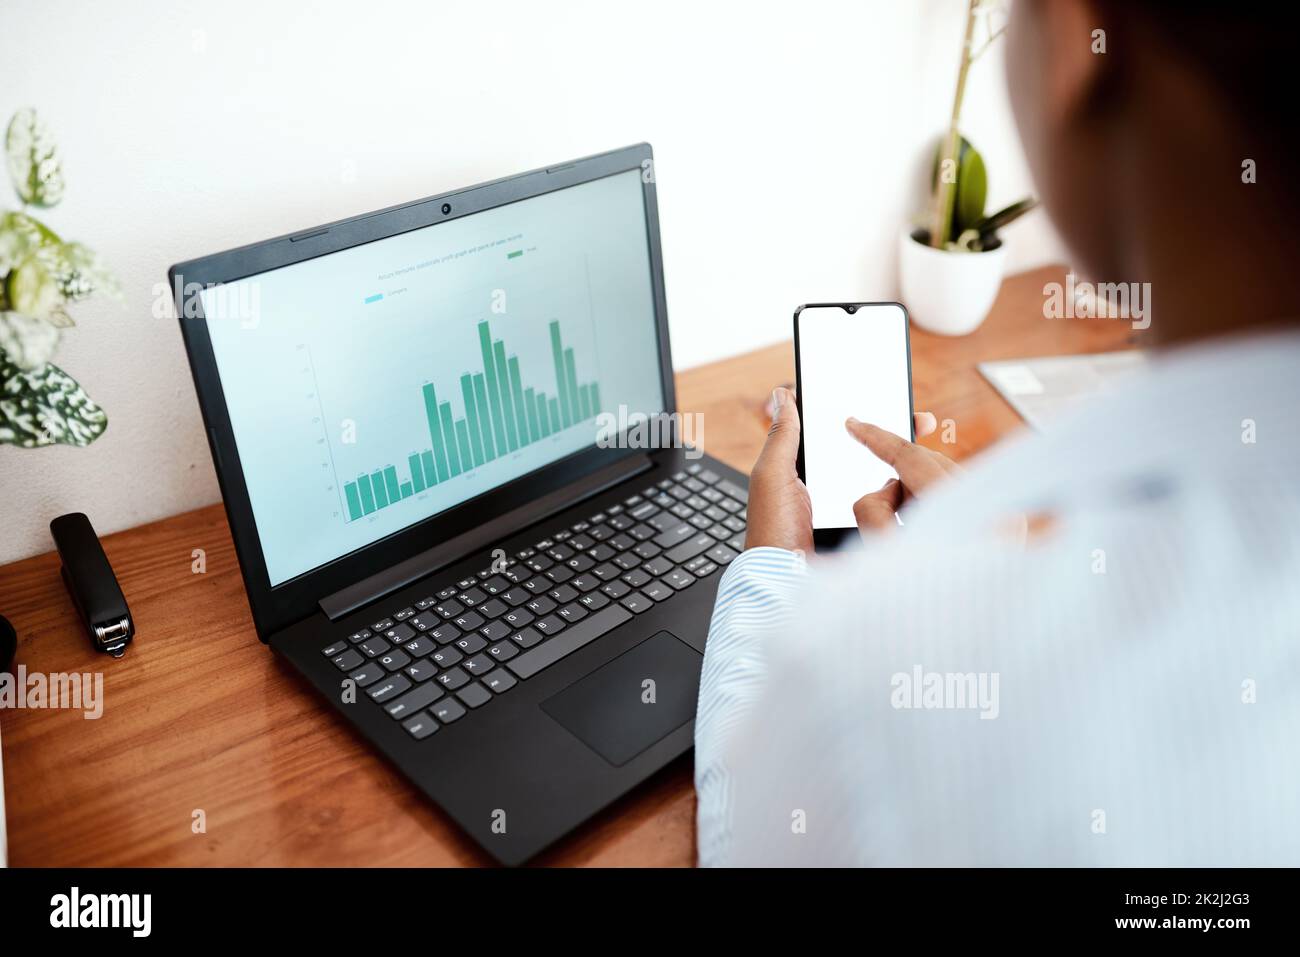 Smart tech is an accountants best friend. Cropped shot of a businesswoman using a laptop and smartphone while analysing financial data at her desk. Stock Photo